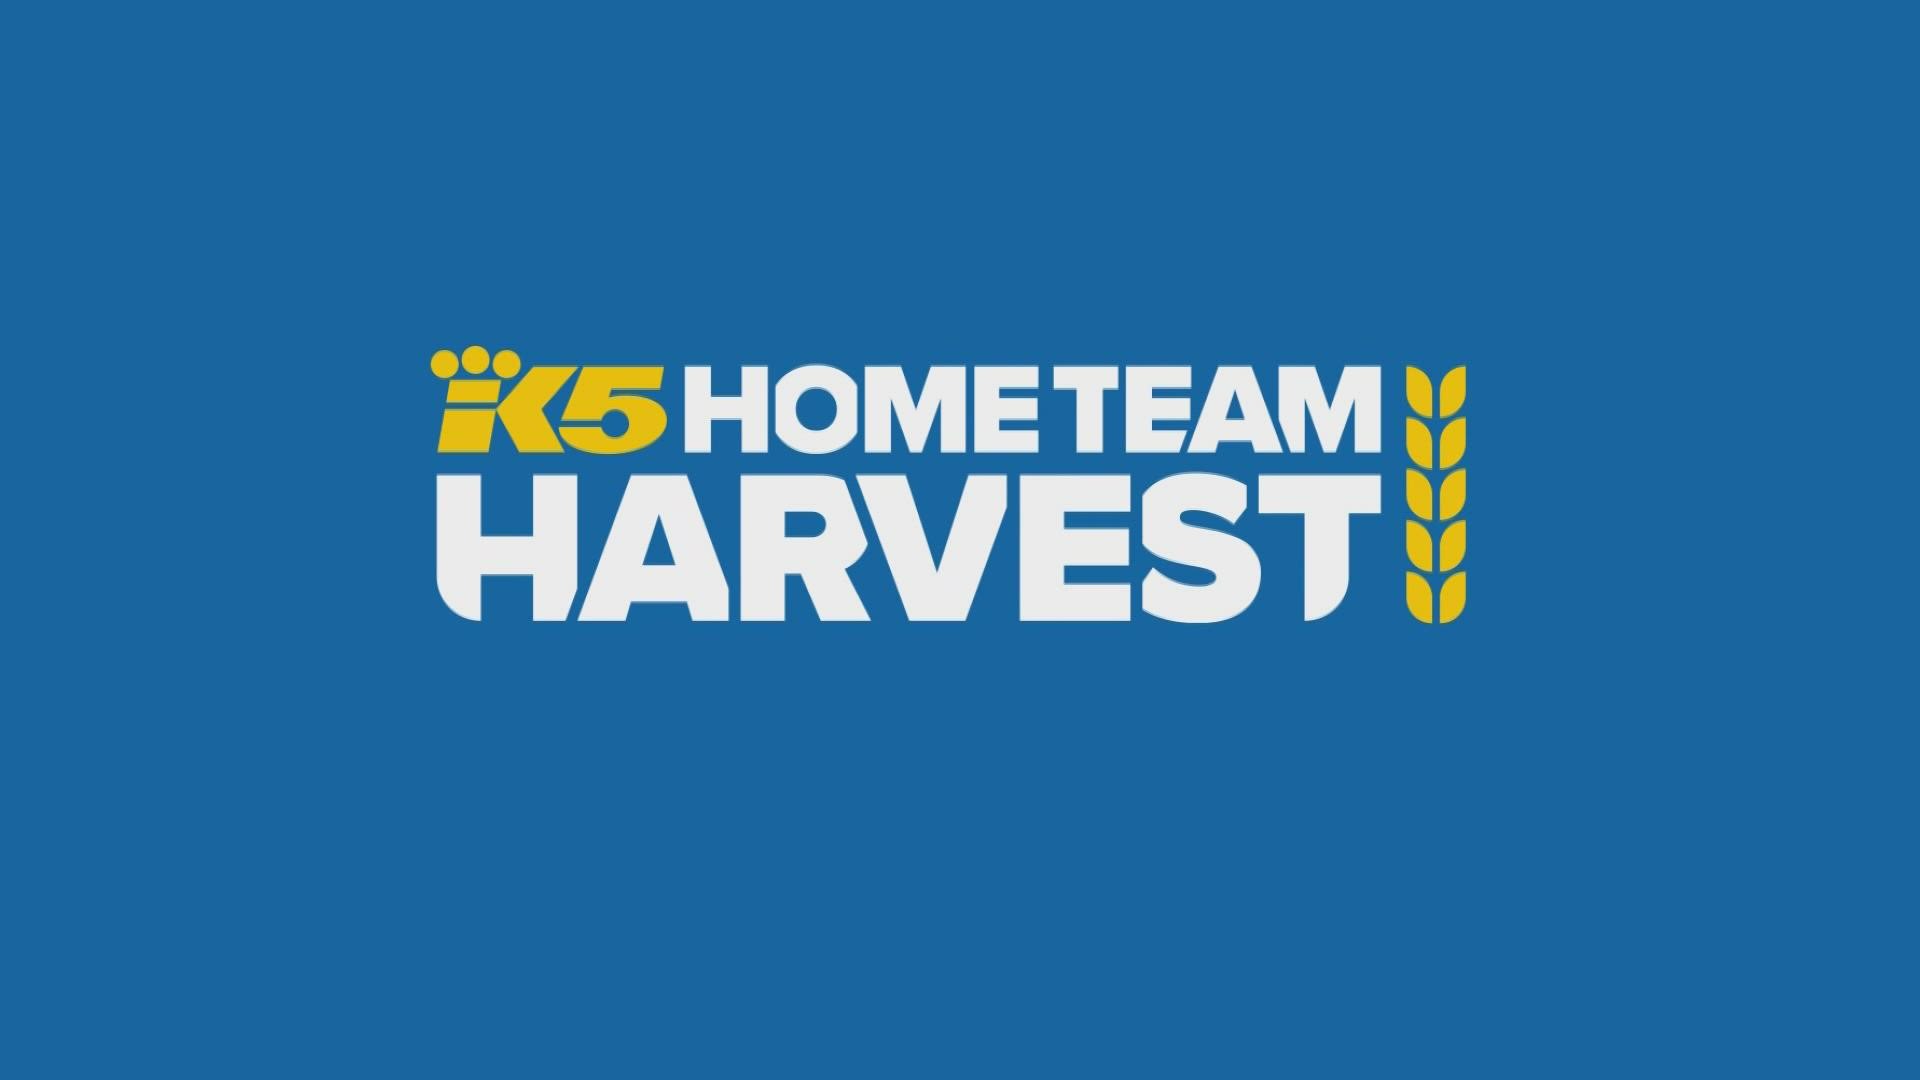 Home Team Harvest exceeded it 2021 goal of 21 million meals by more than 500,000 meals.